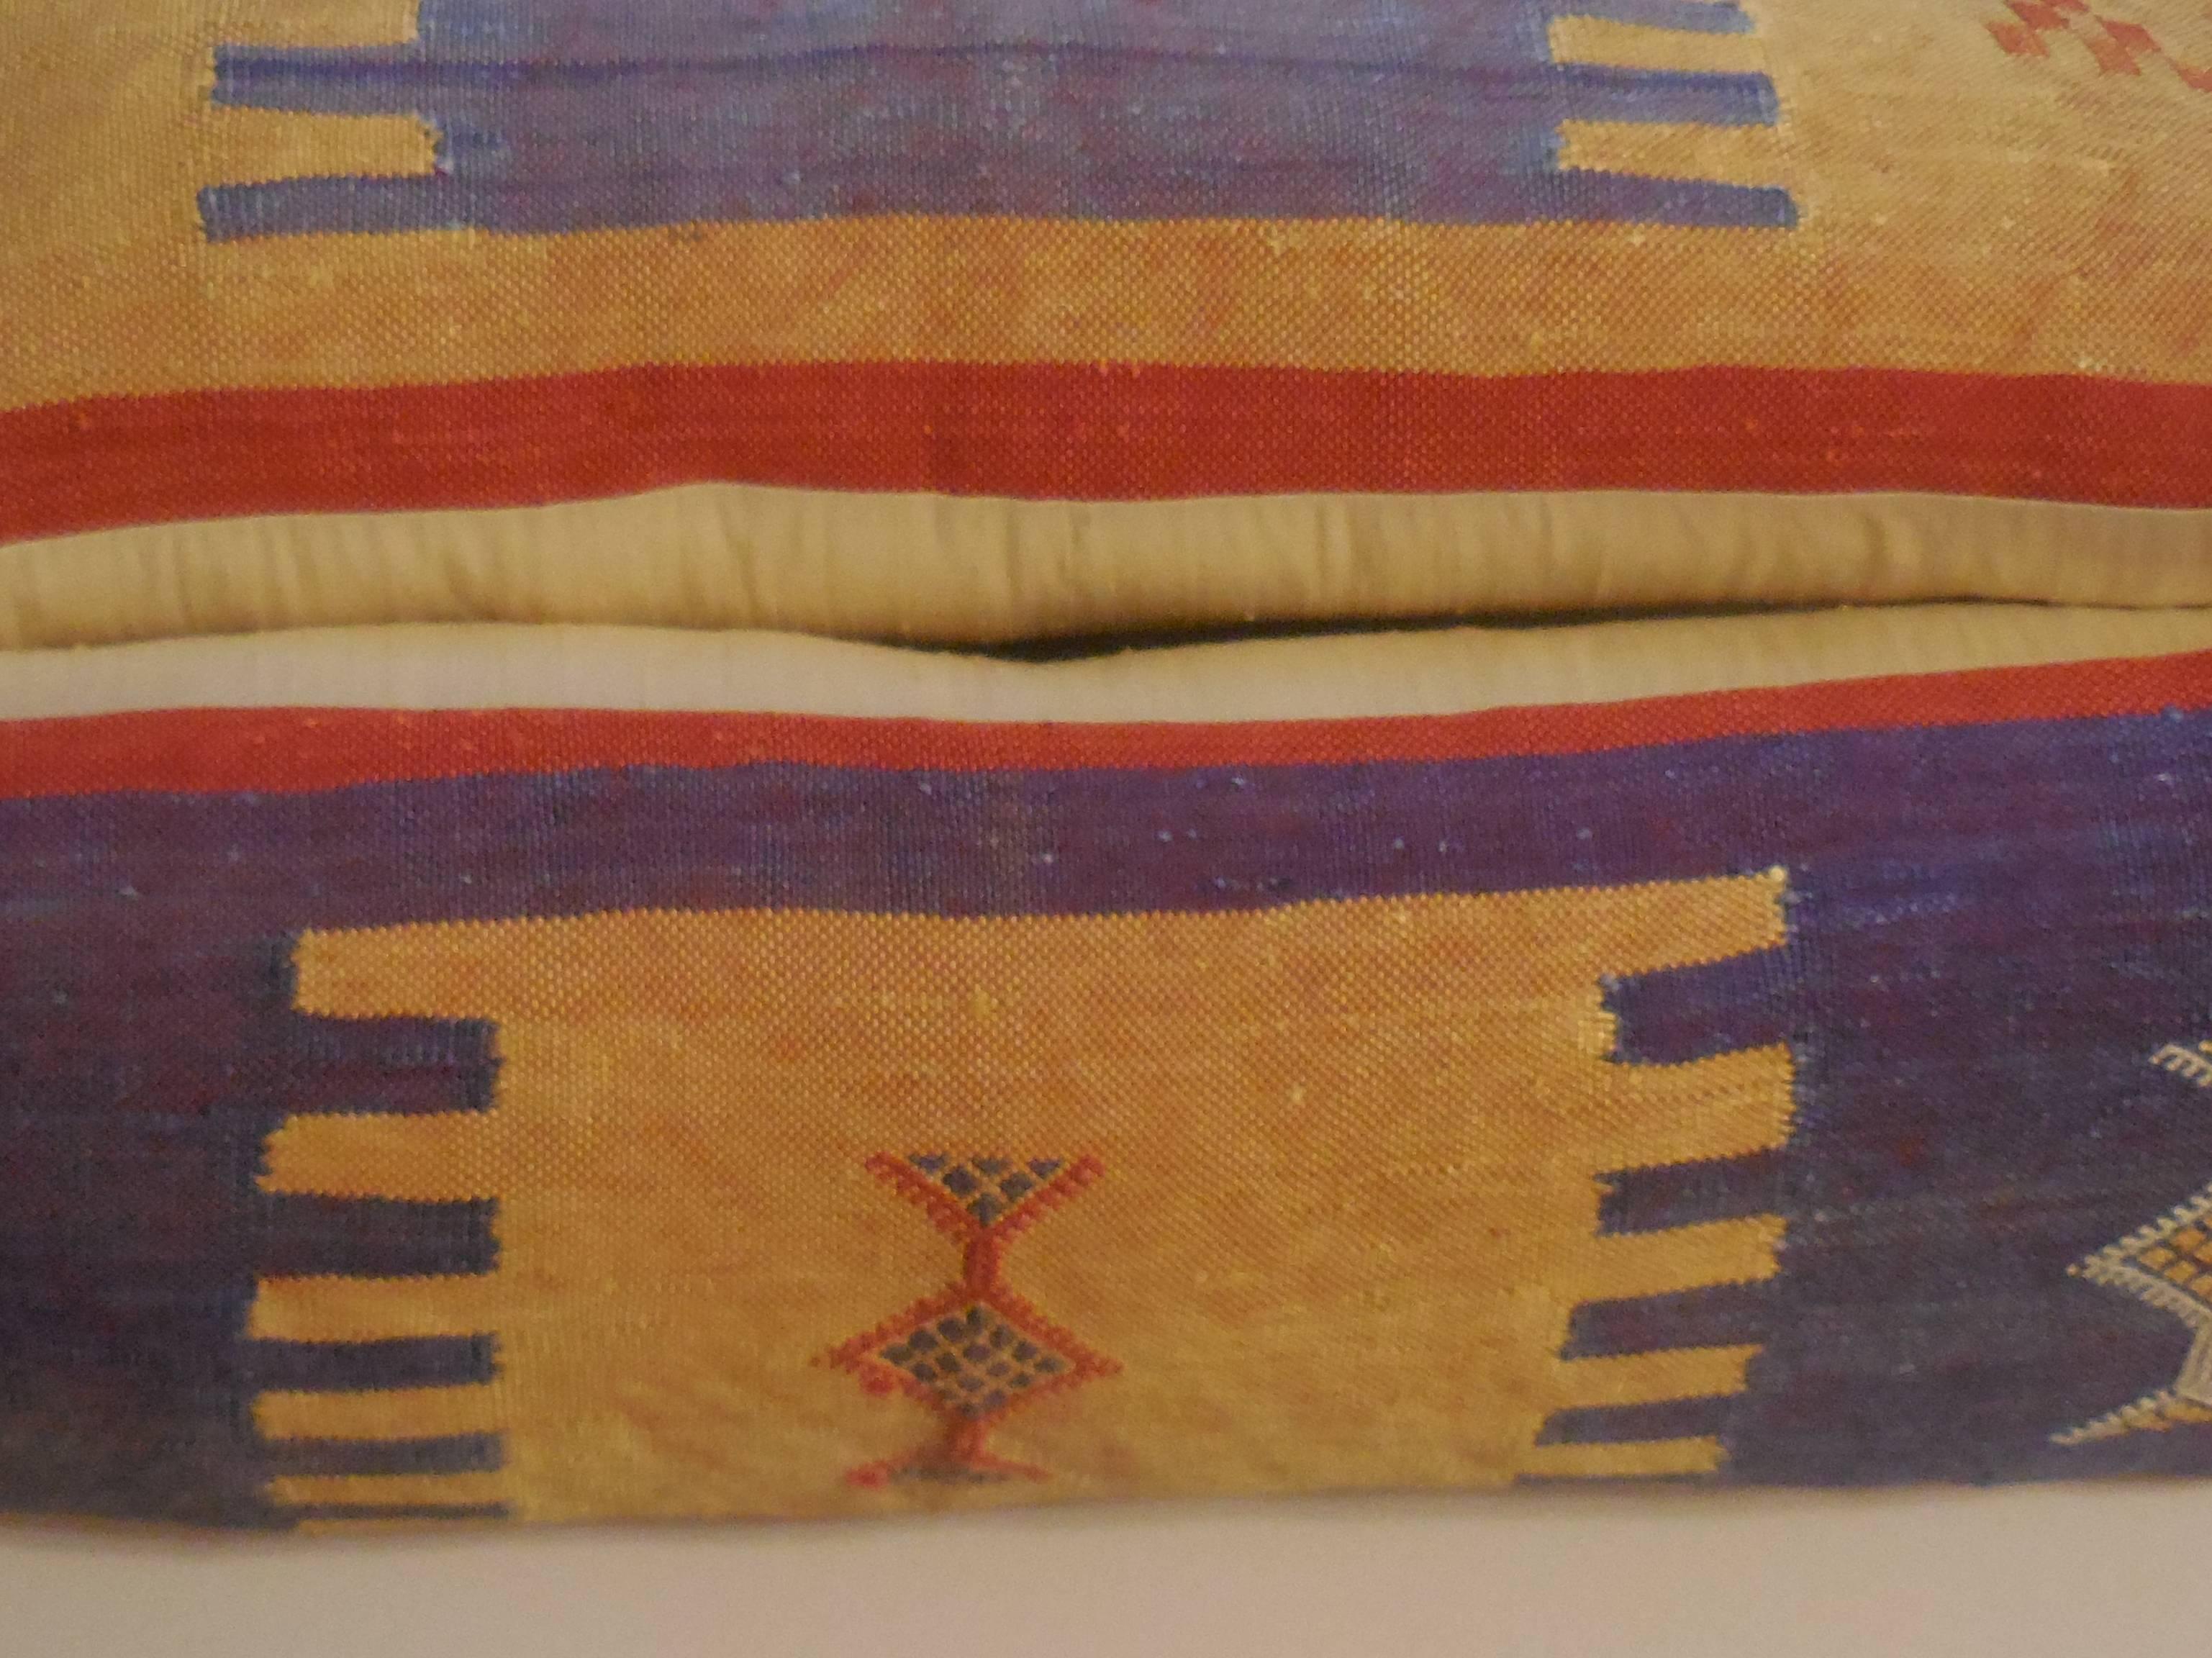 Beautiful pair of pillows made of silk with very muted colors on geometric motifs.
Silk backing, frash inserts.
Sizes:
1. 27